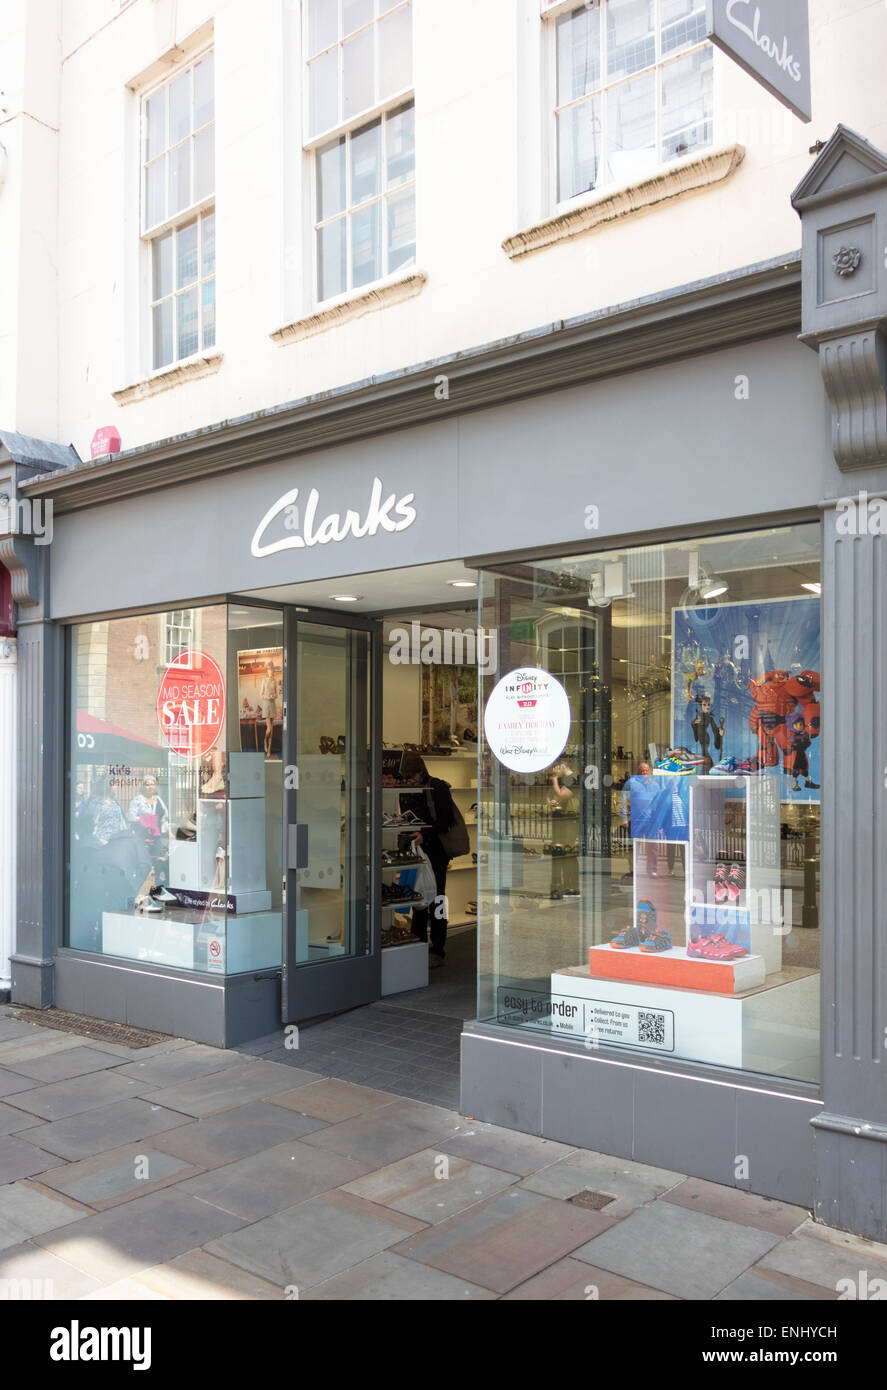 large clarks store in london